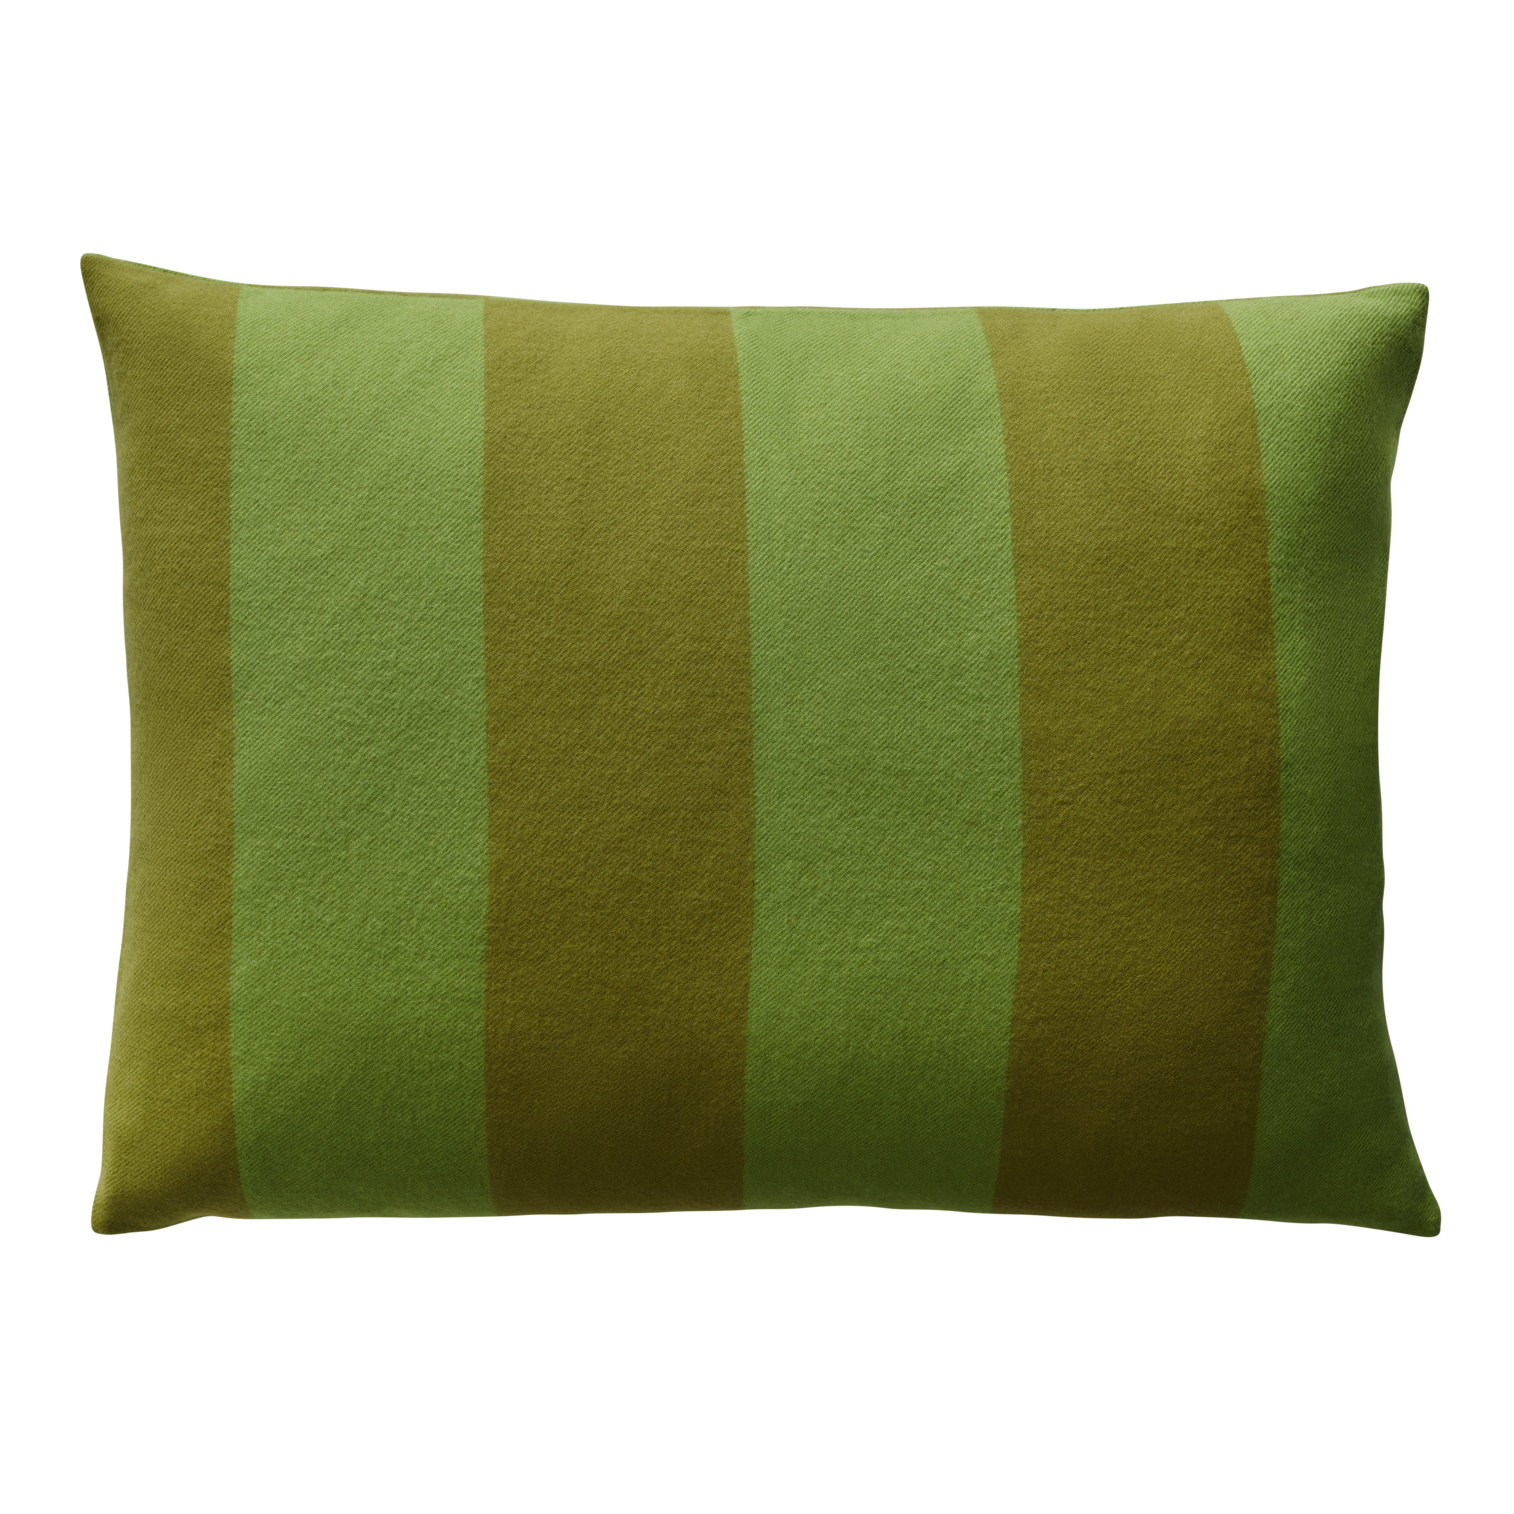 The The Polychrome Pillow -   Green / Sage